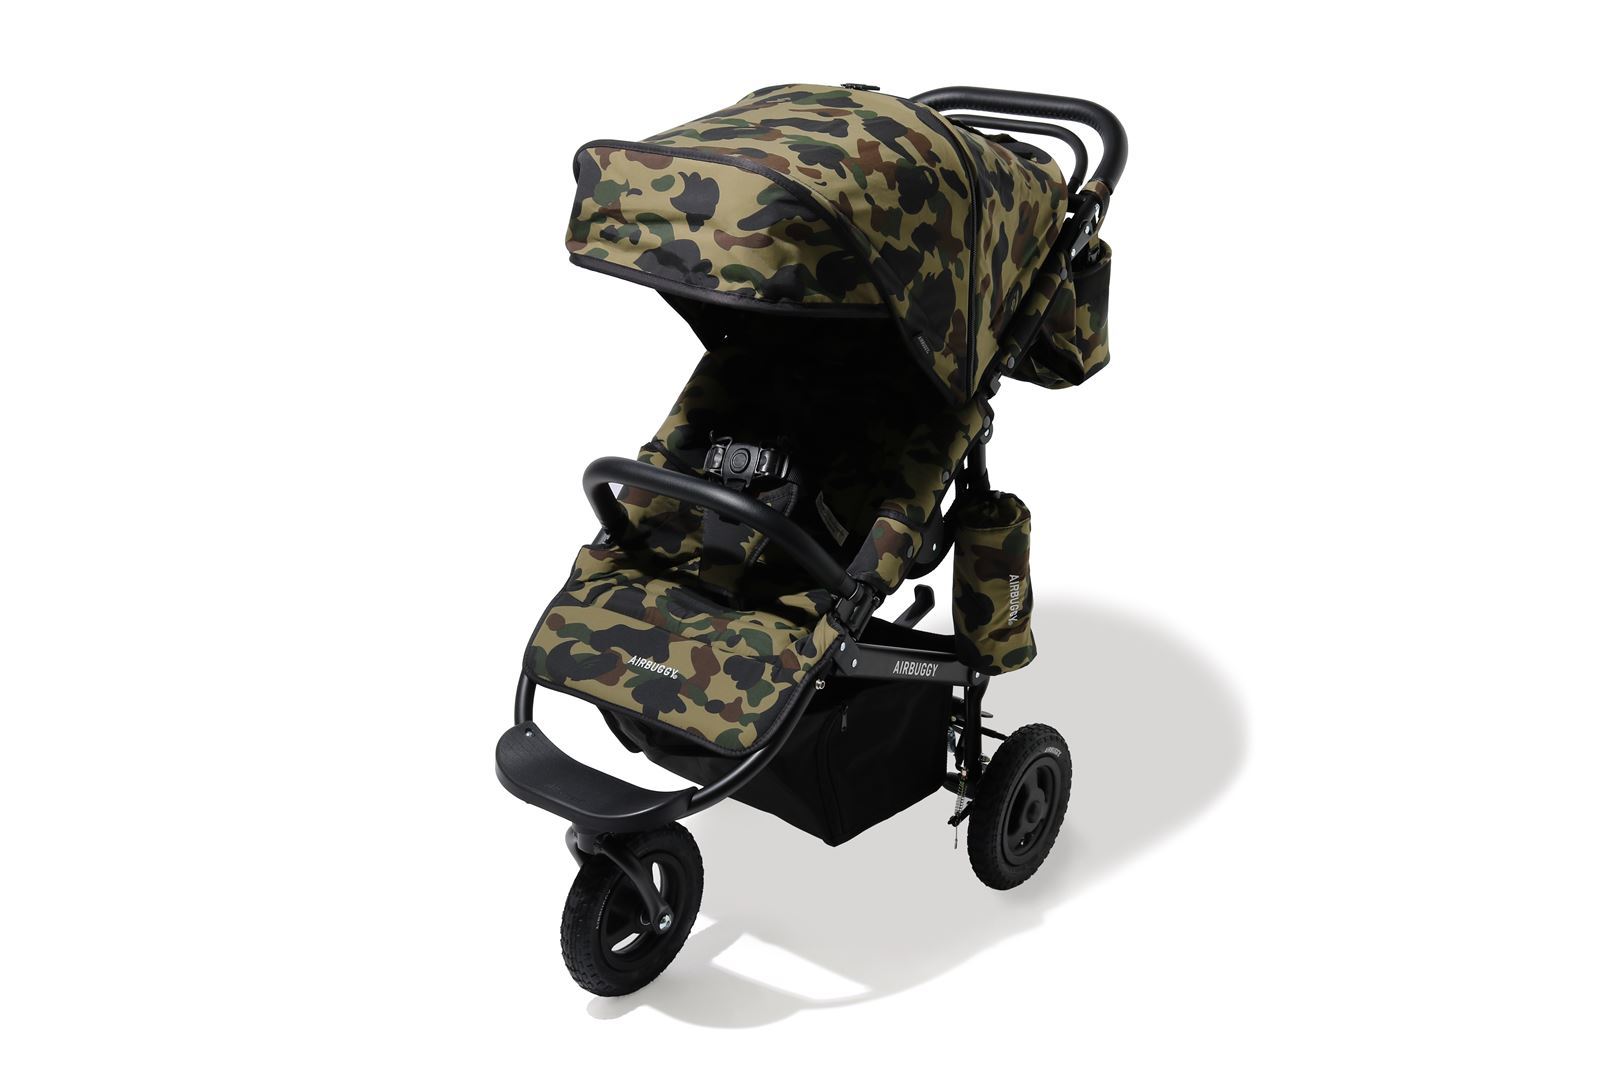 1ST CAMO AIRBUGGY_a0174495_11244987.jpg